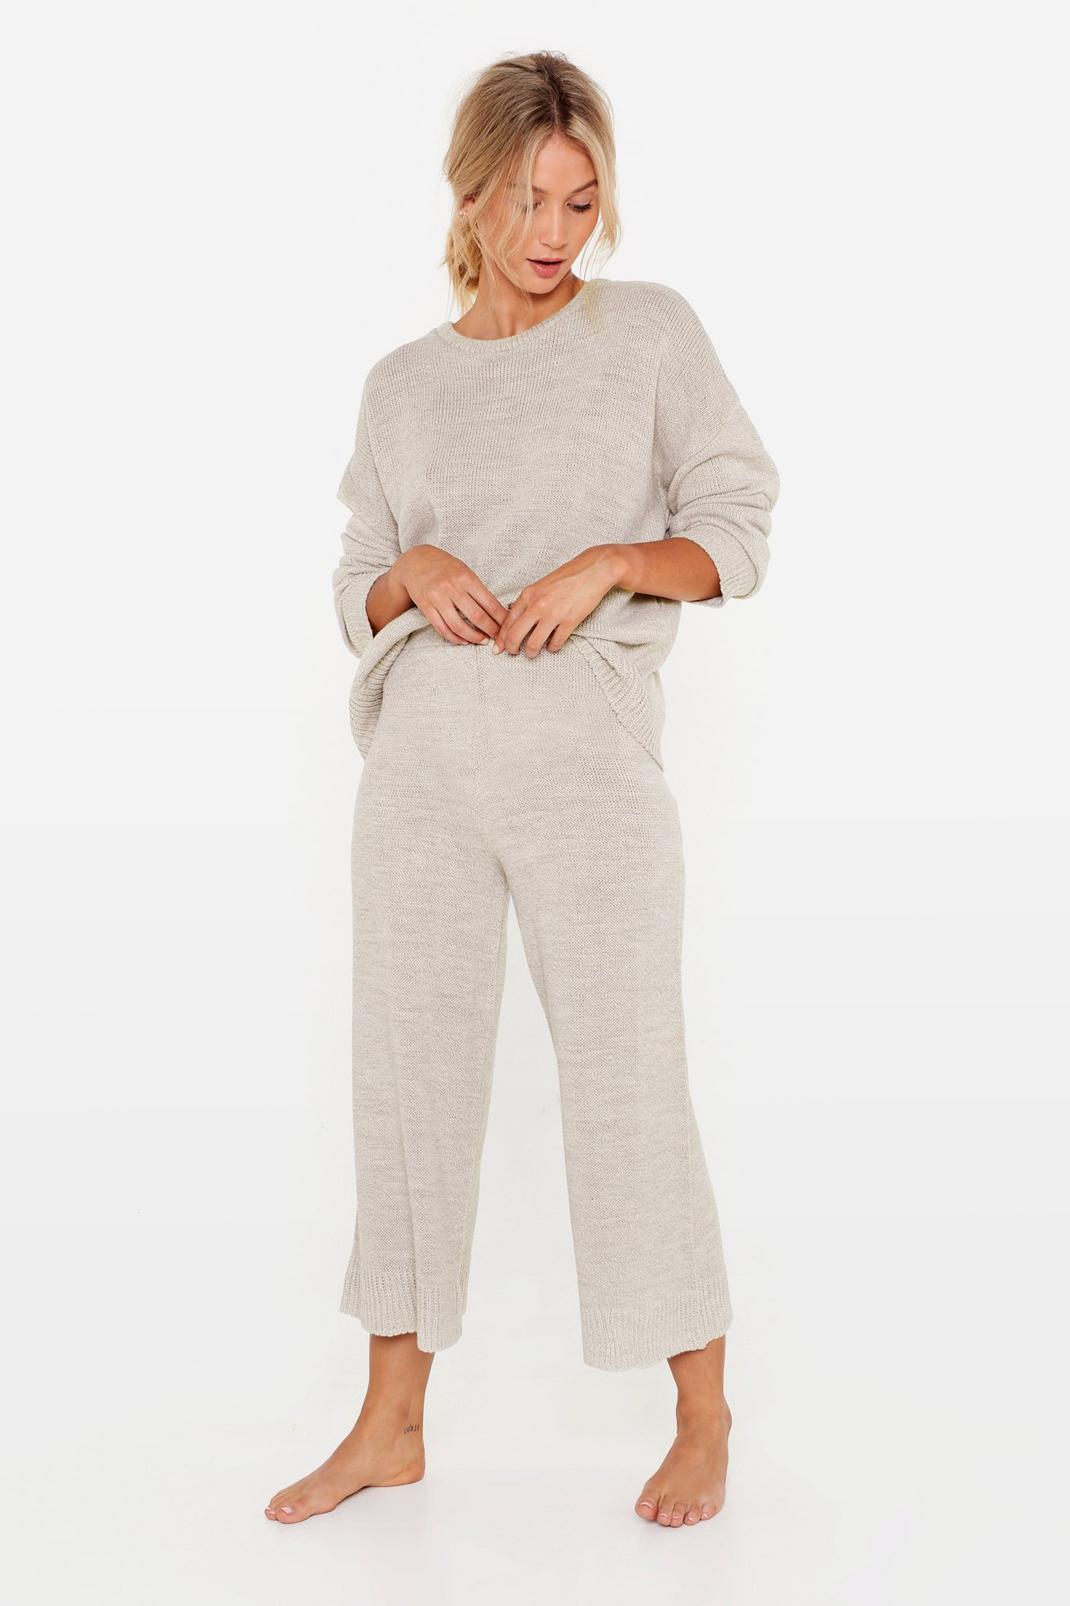 Oatmeal You've Met Your Match Knitted Sweater and Pants image number 1